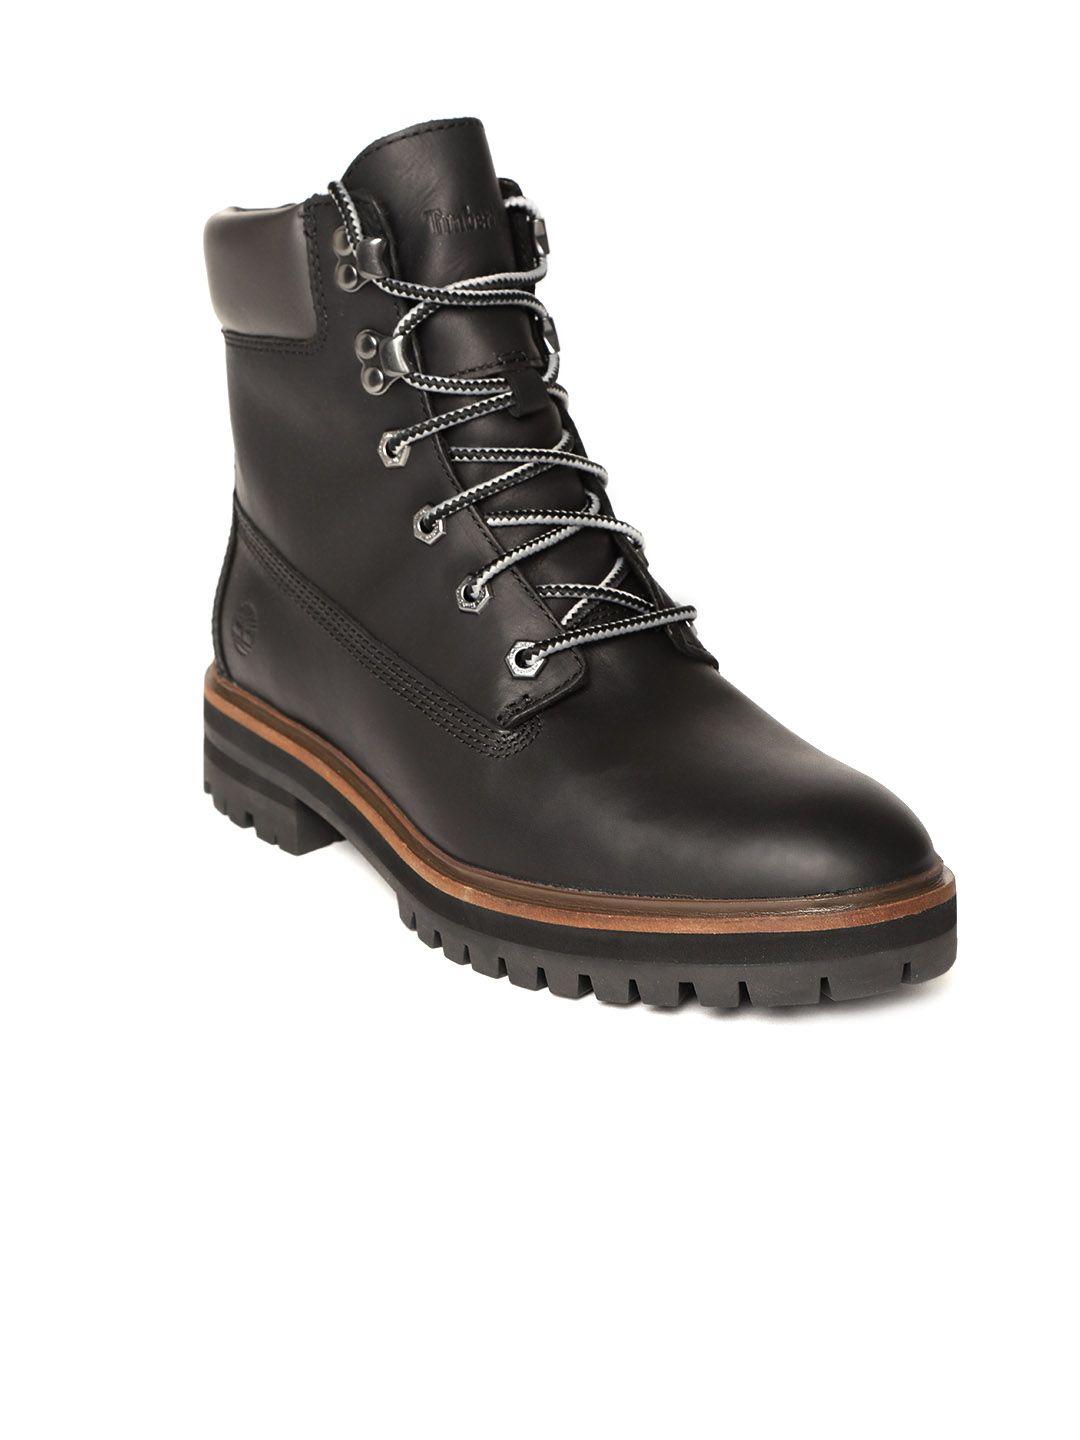 timberland-women-black-solid-leather-london-sq-6in-blk,fq-high-top-flat-boots